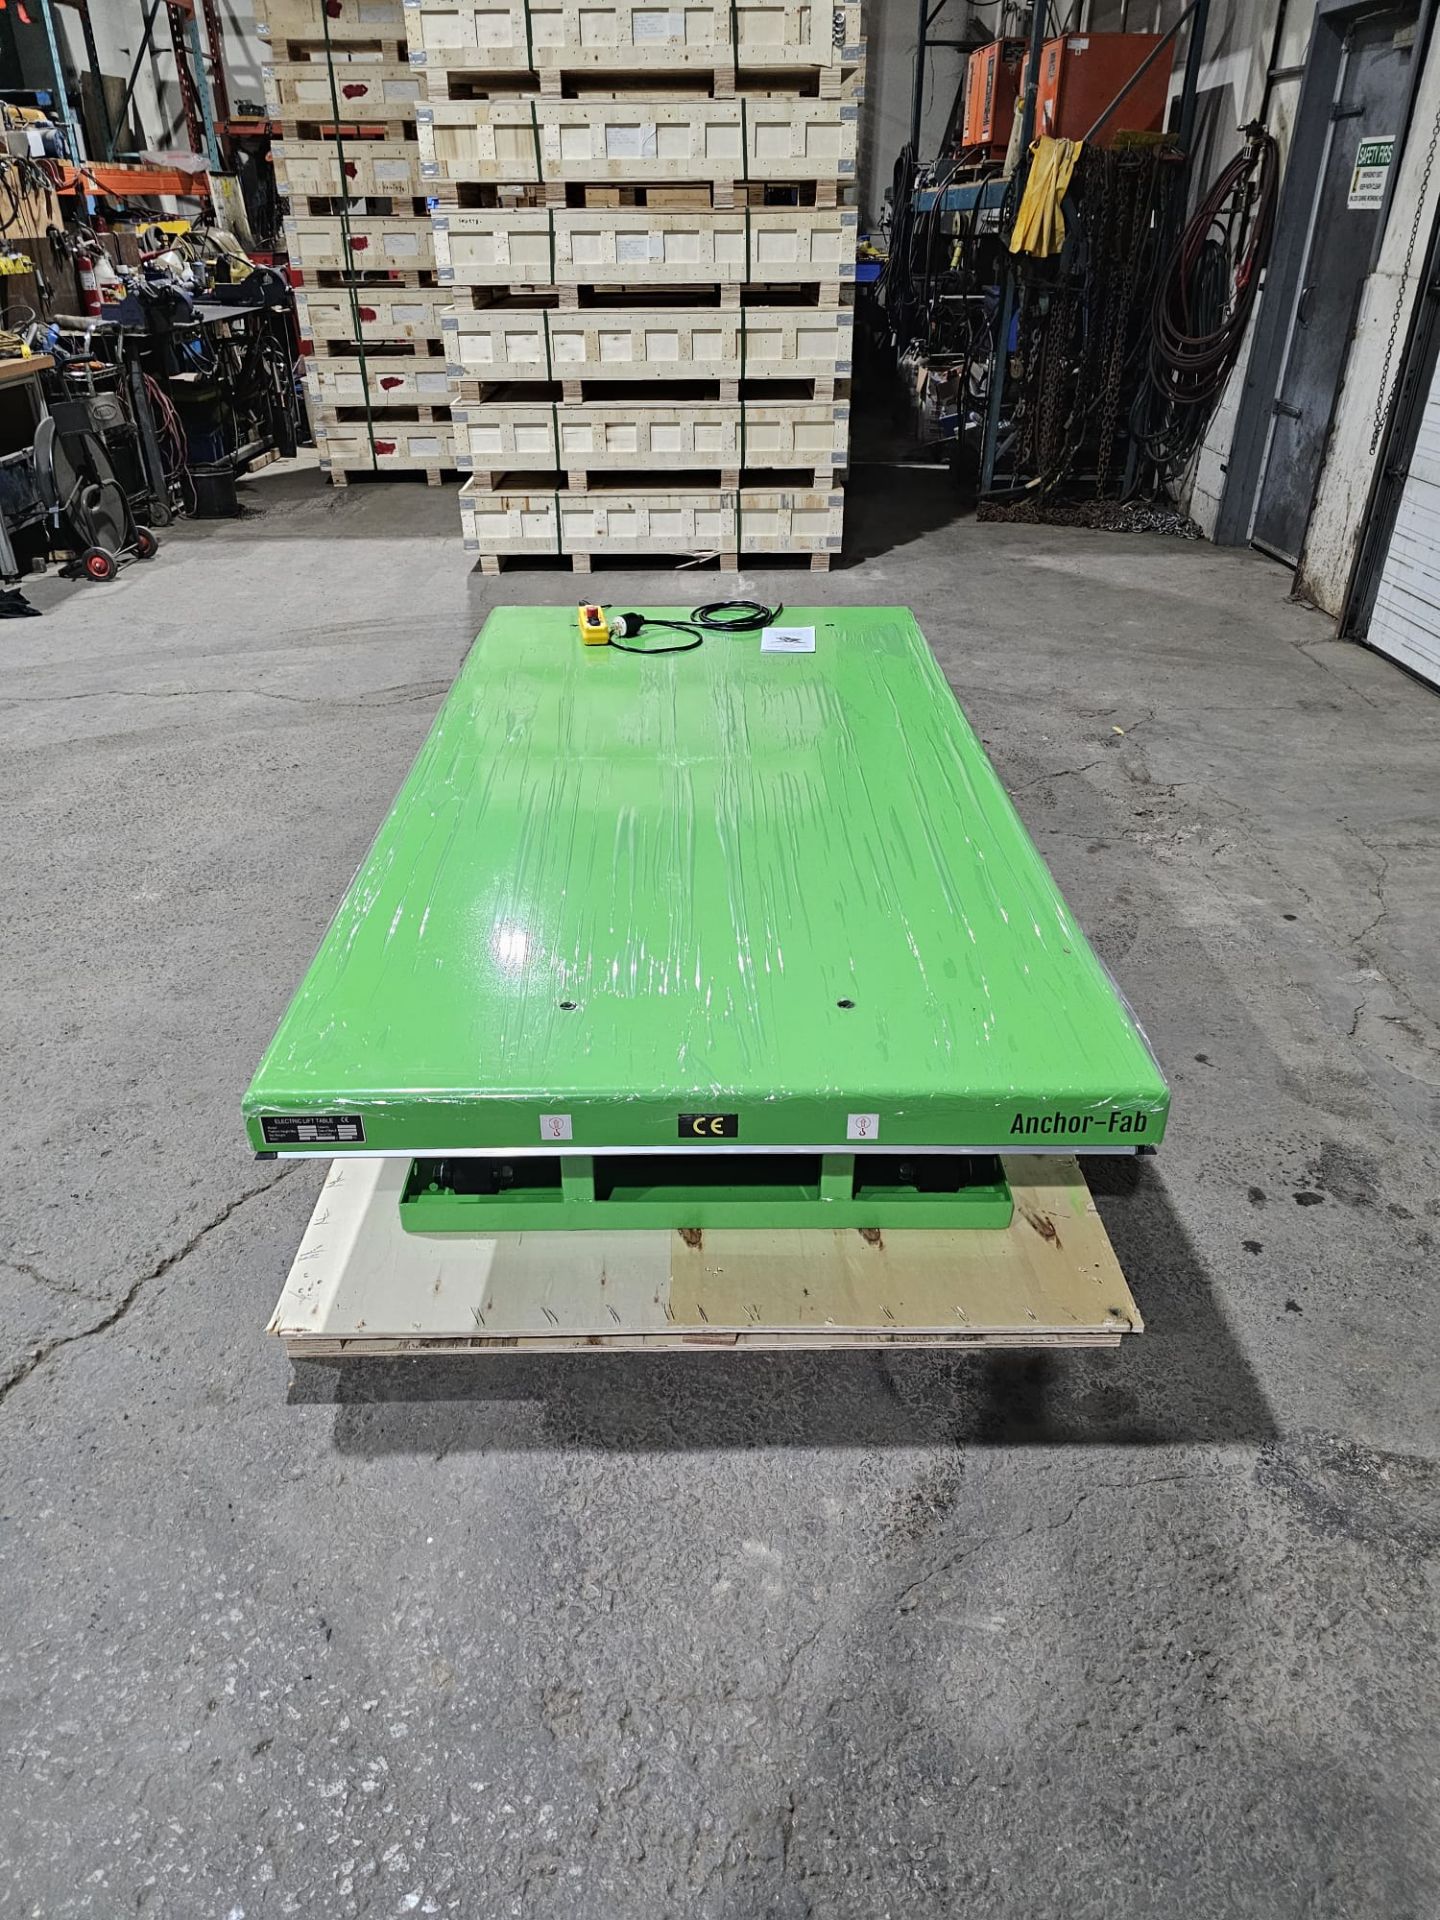 HW Hydraulic Lift Table 94" x 47" x 64" lift - 11,000lbs capacity - UNUSED and MINT - 220V - Image 5 of 8